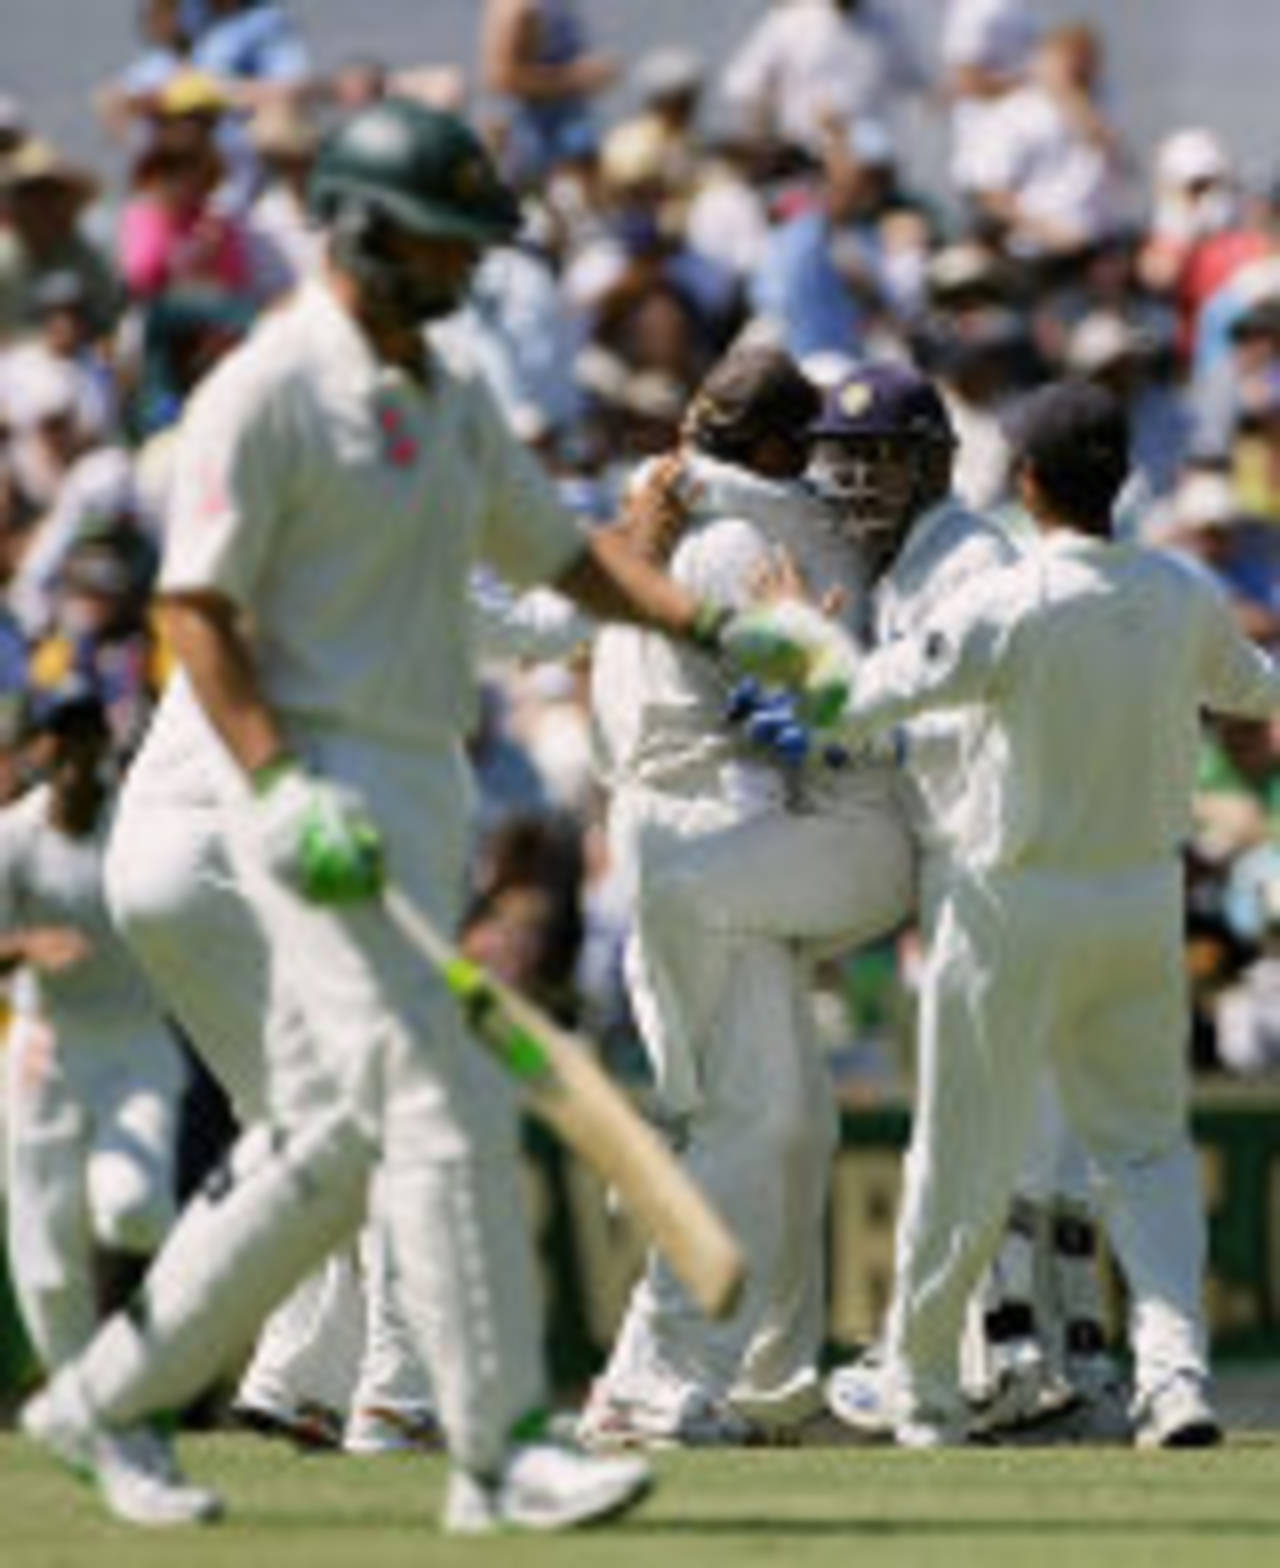 Adam Gilchrist walks back after being bowled round the legs by Virender Sehwag, Australia v India, 3rd Test, Perth, 4th day, January 19, 2008